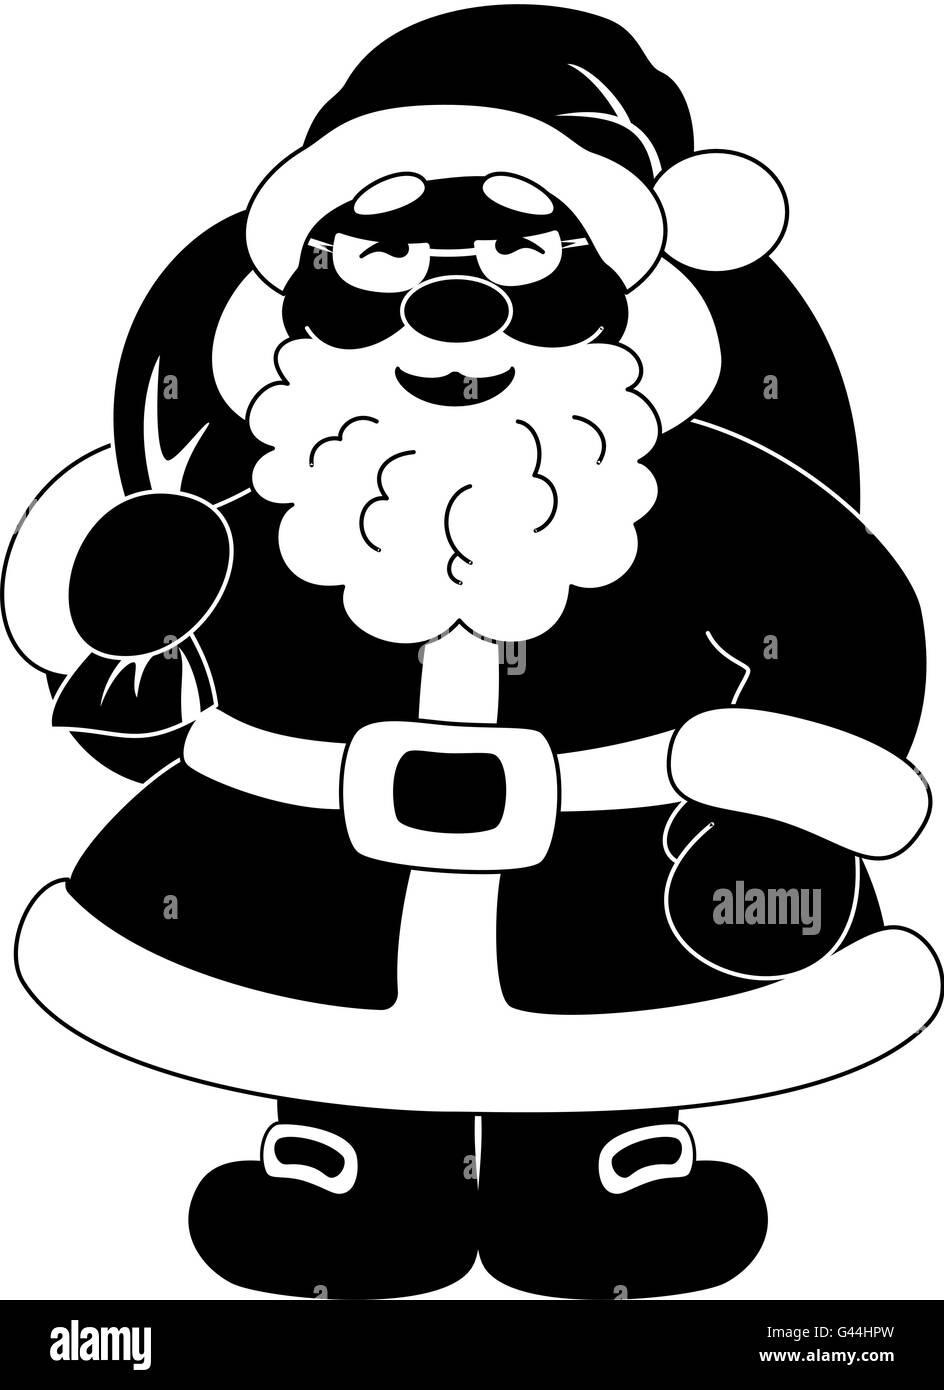 https://c8.alamy.com/comp/G44HPW/santa-claus-with-bag-of-gifts-silhouette-G44HPW.jpg